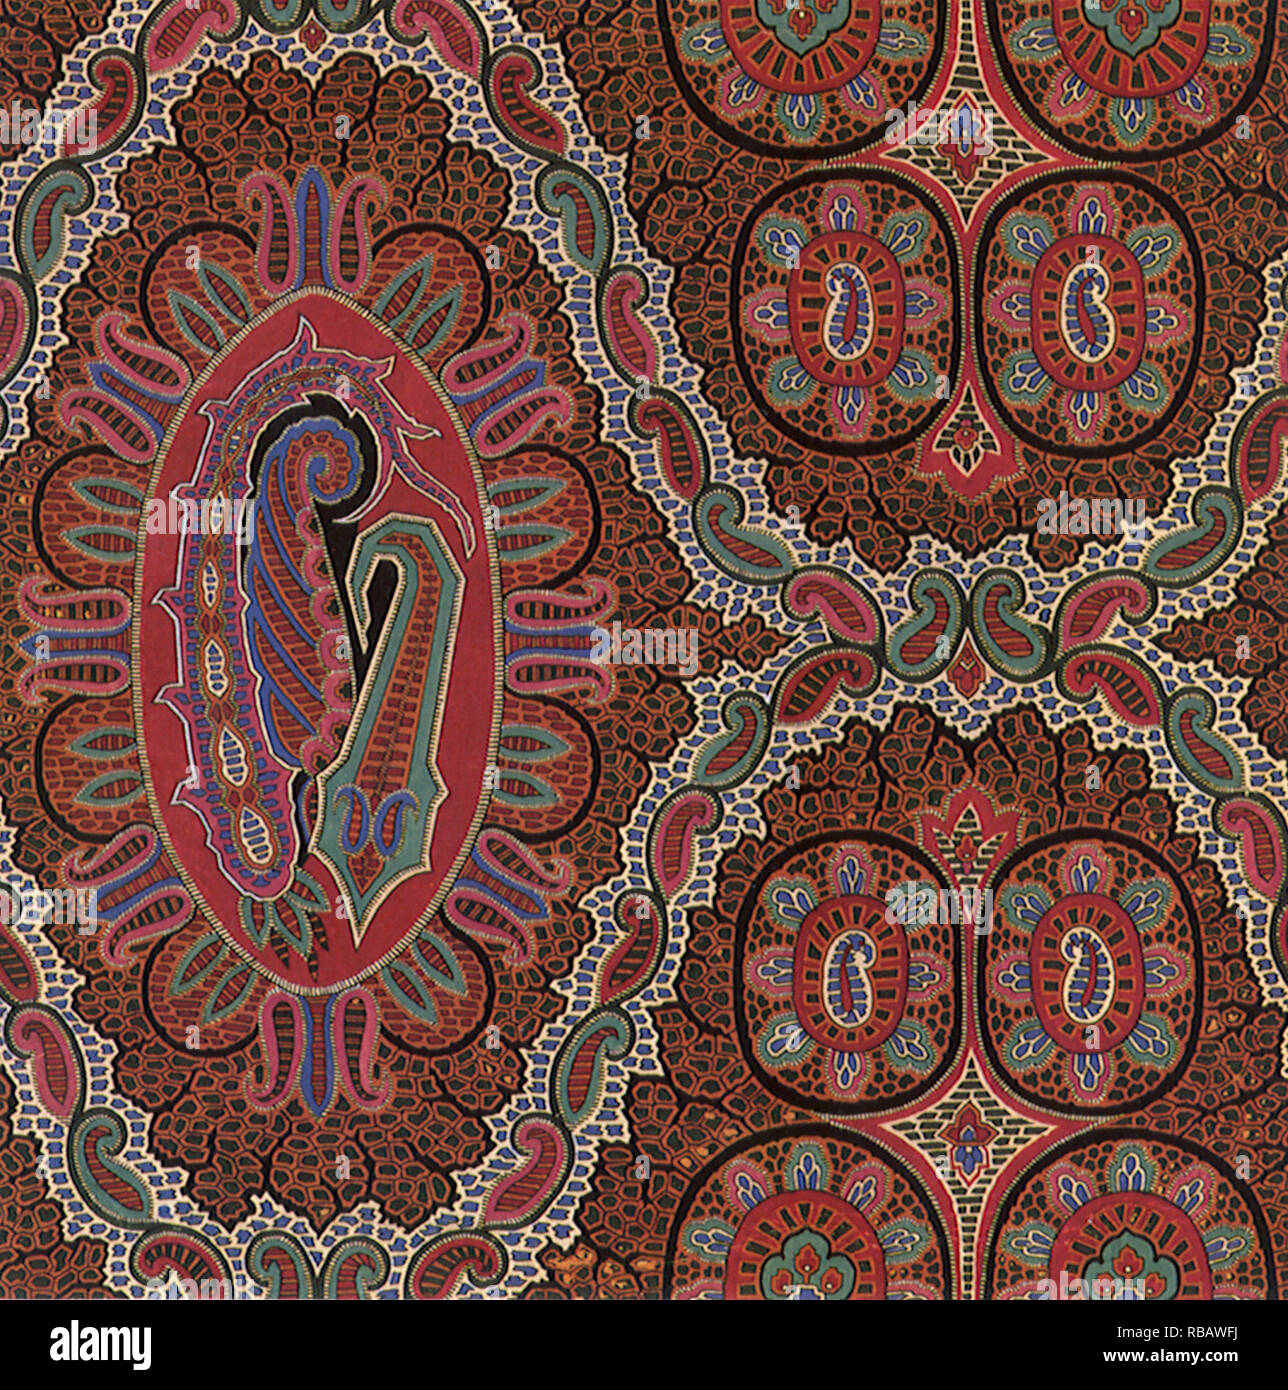 Paisley and Oval Motif. Stock Photo